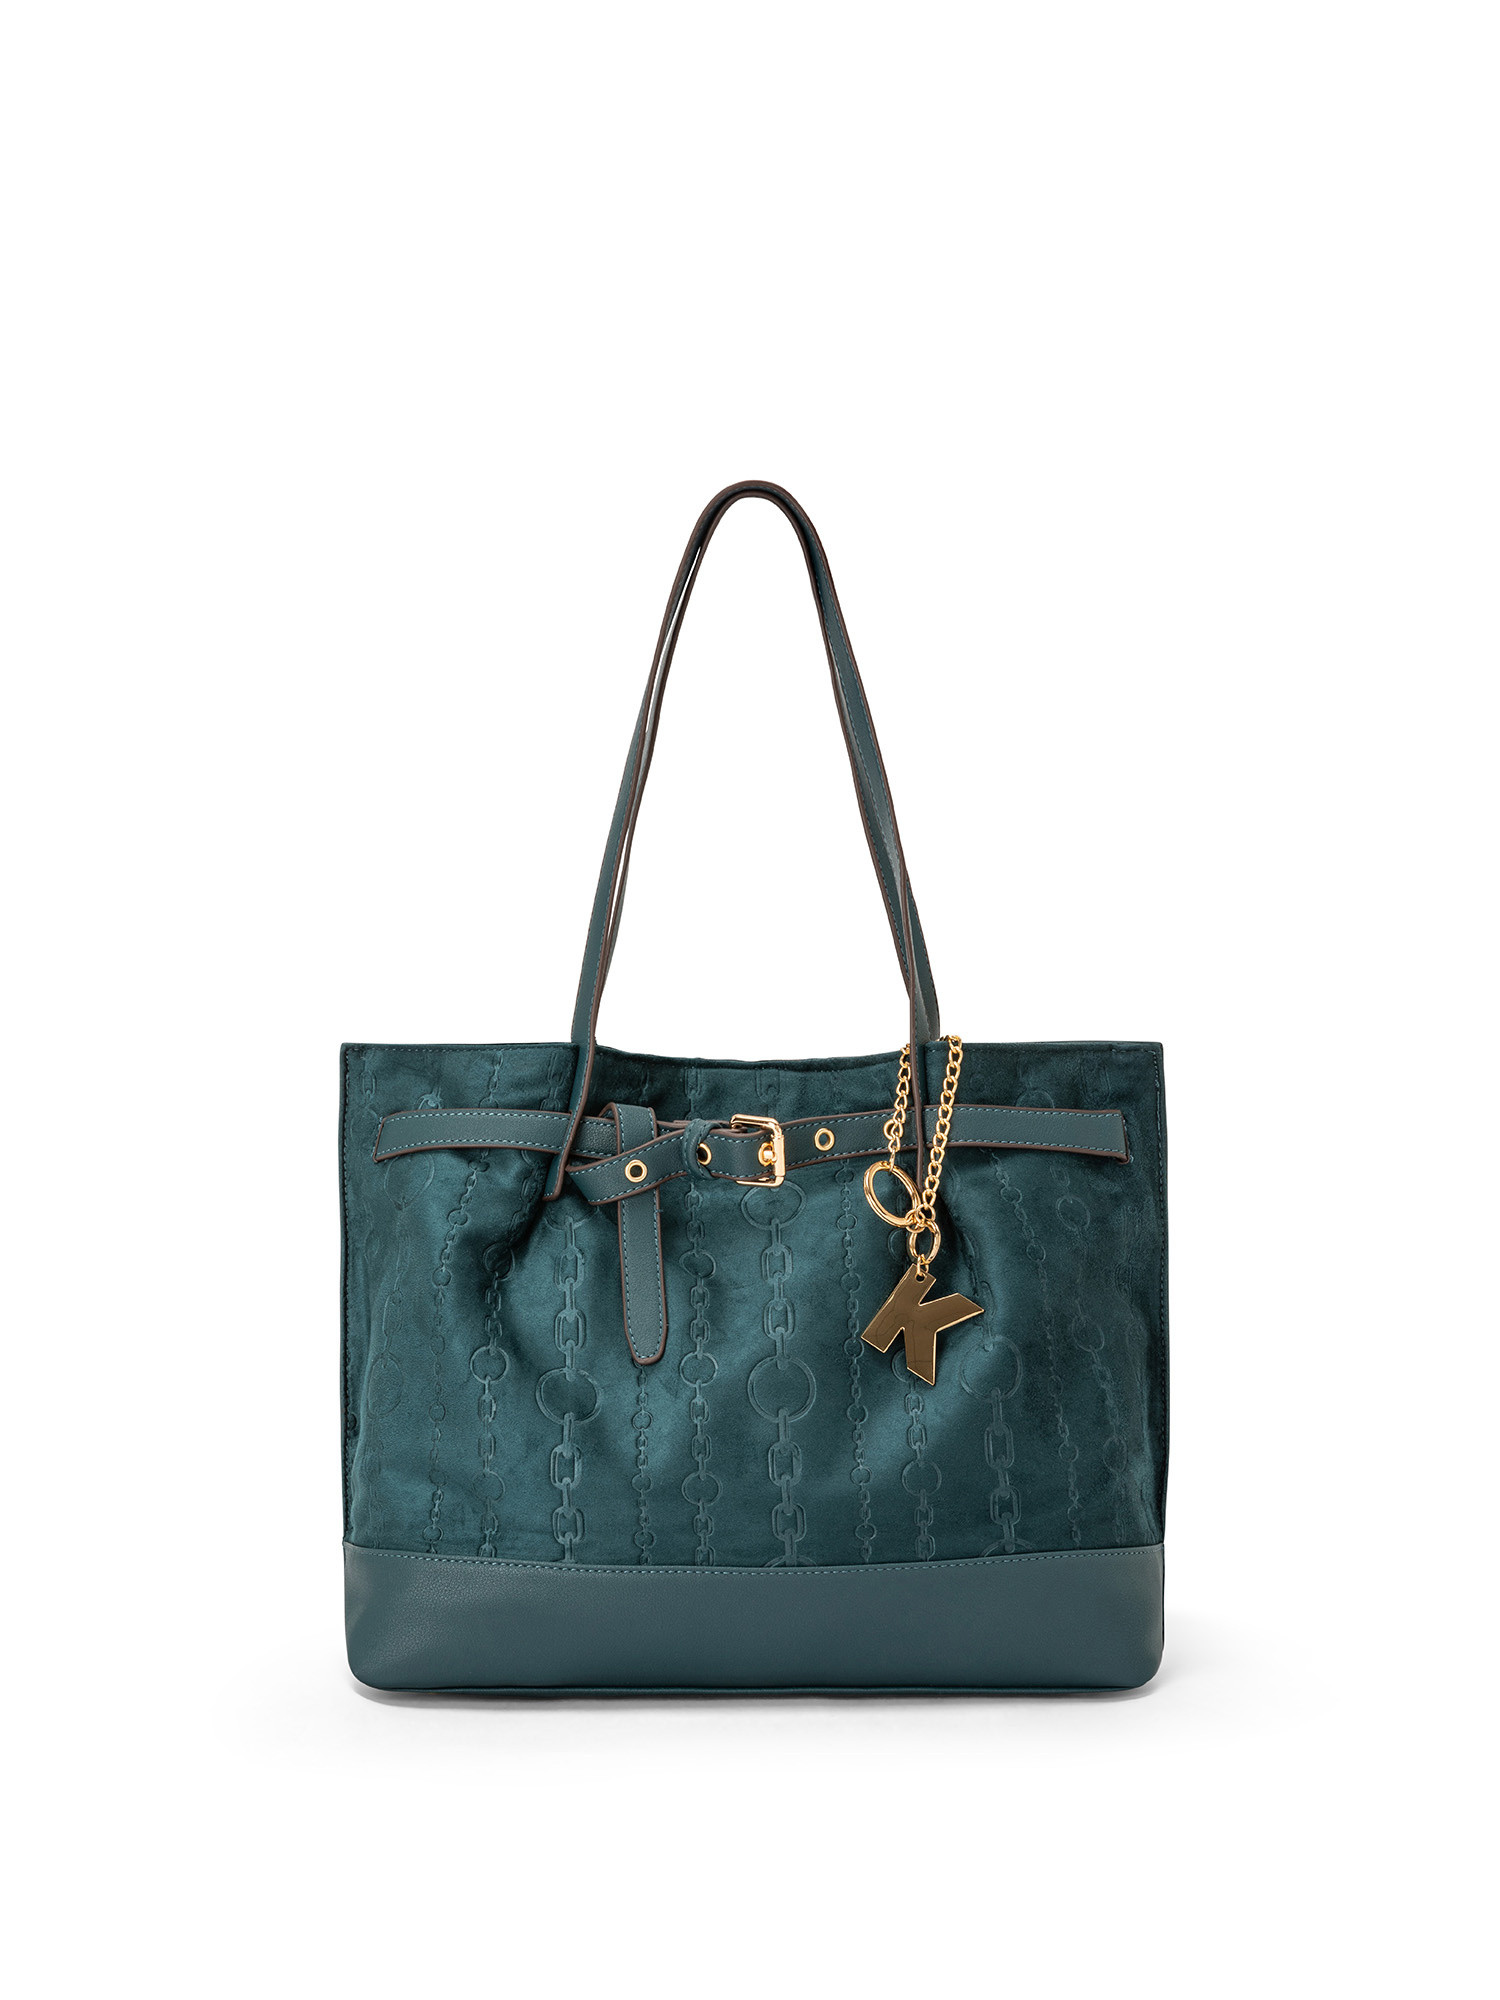 Koan - Shopping bag with print, Green teal, large image number 0